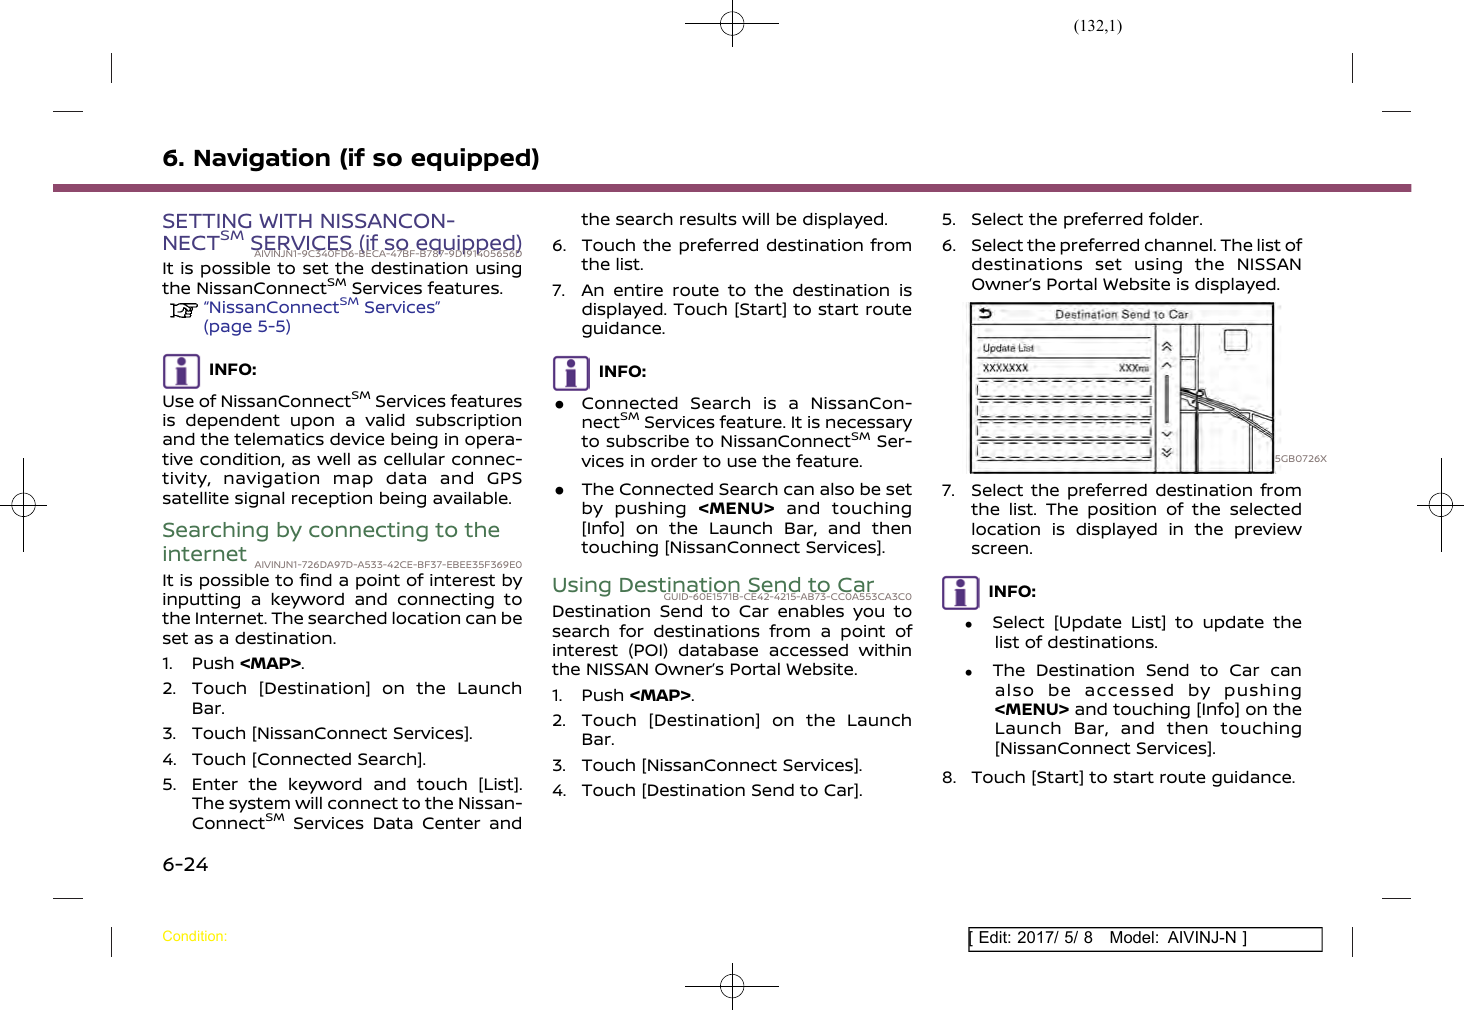 Page 132 of Robert Bosch Car Multimedia AIVICMFB0 Navigation System with Bluetooth and WLAN User Manual